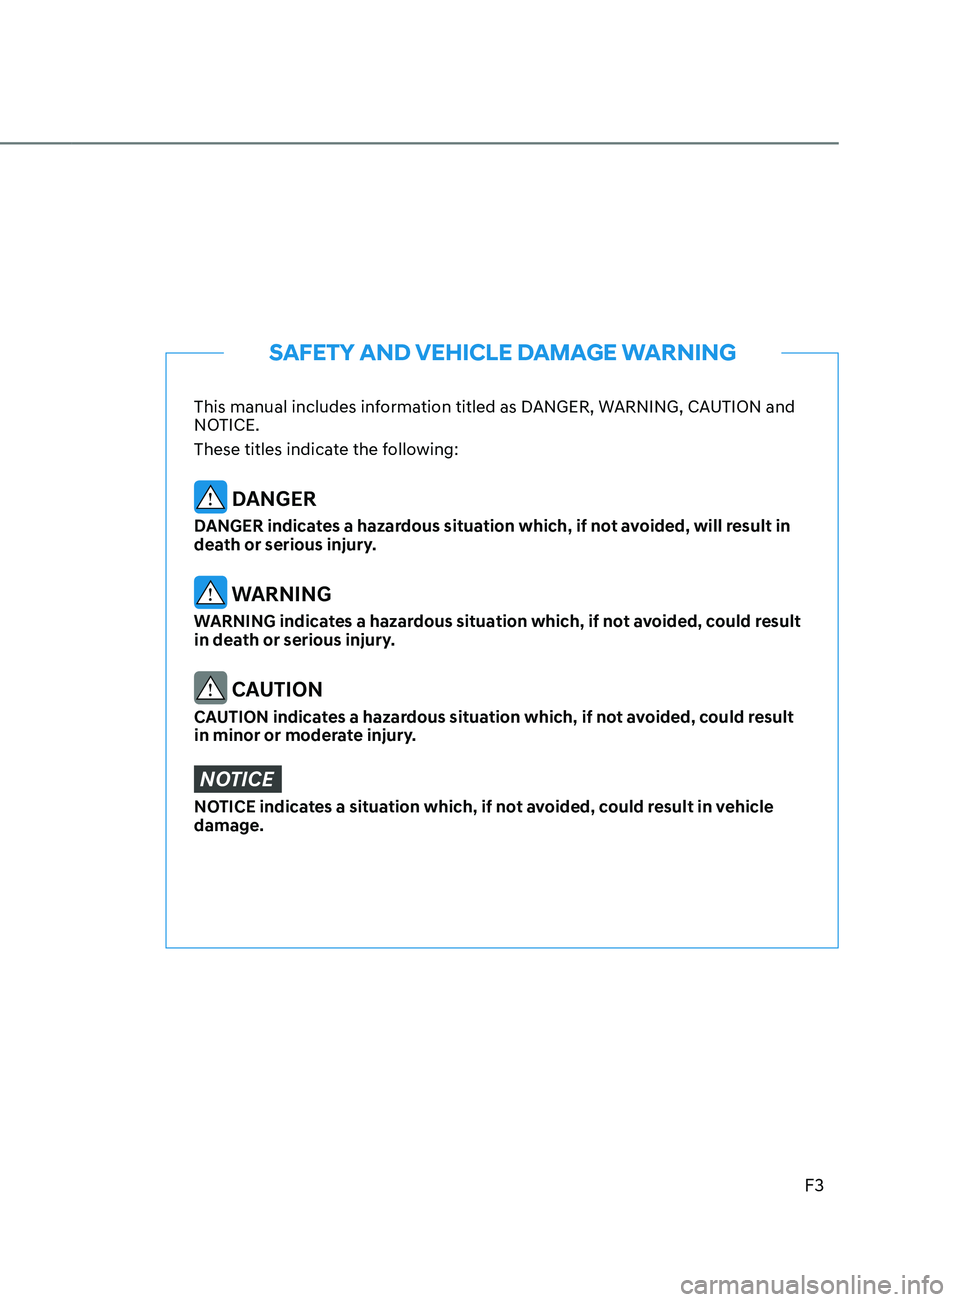 HYUNDAI SANTA FE 2021  Owners Manual F3
This manual includes information titled as DANGER, WARNING, CAUTION and 
NOTICE.
These titles indicate the following:
 DANGER
DANGER indicates a hazardous situation which, if not avoided, will resu